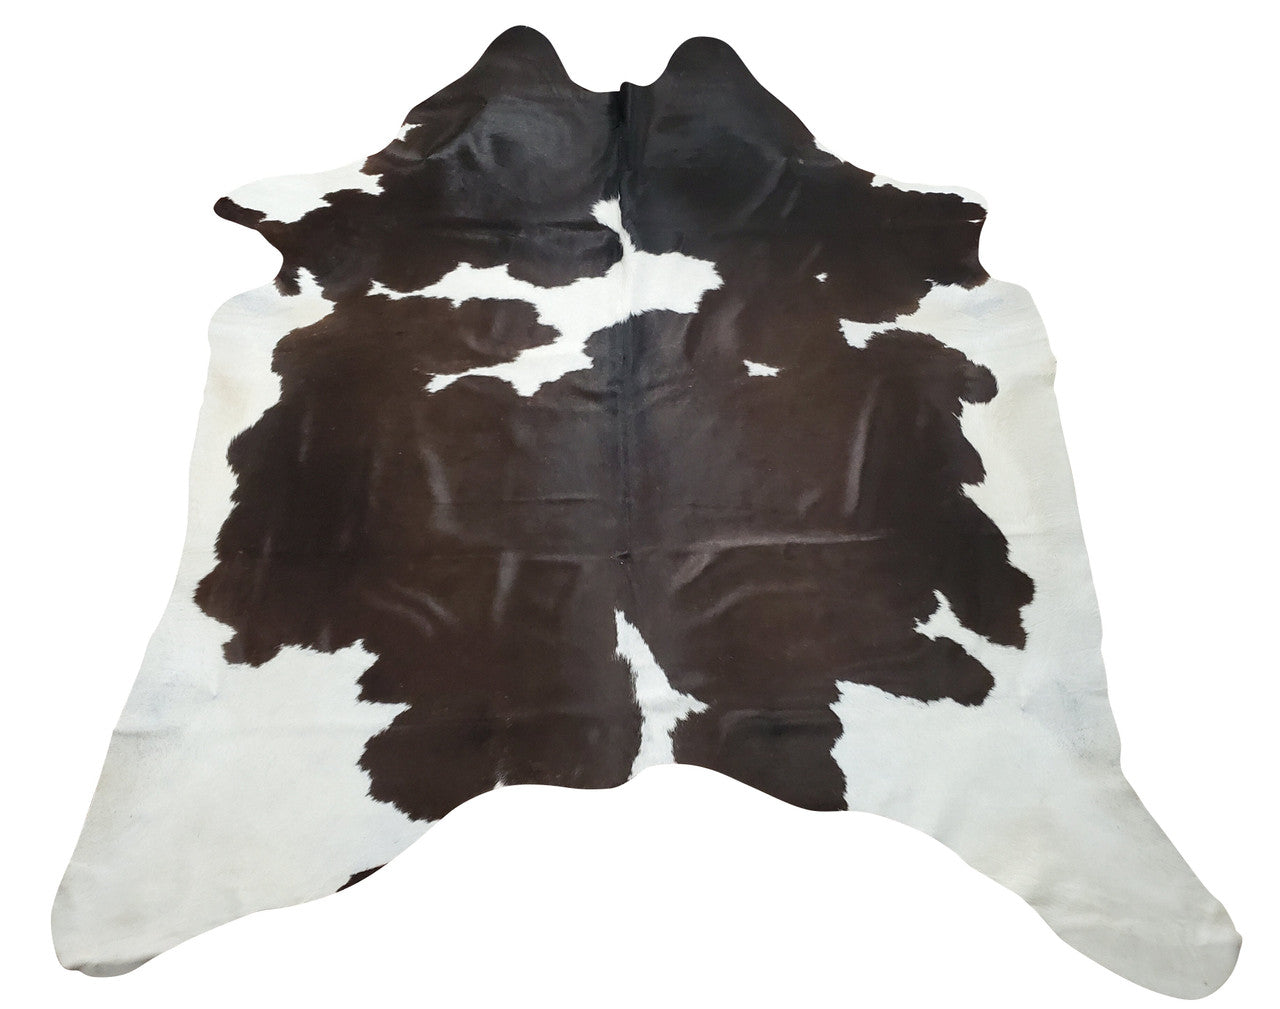 Brazilian cowhide rugs are selected for exotic pattern, brown cowhides are lovely and cozy for any space. 